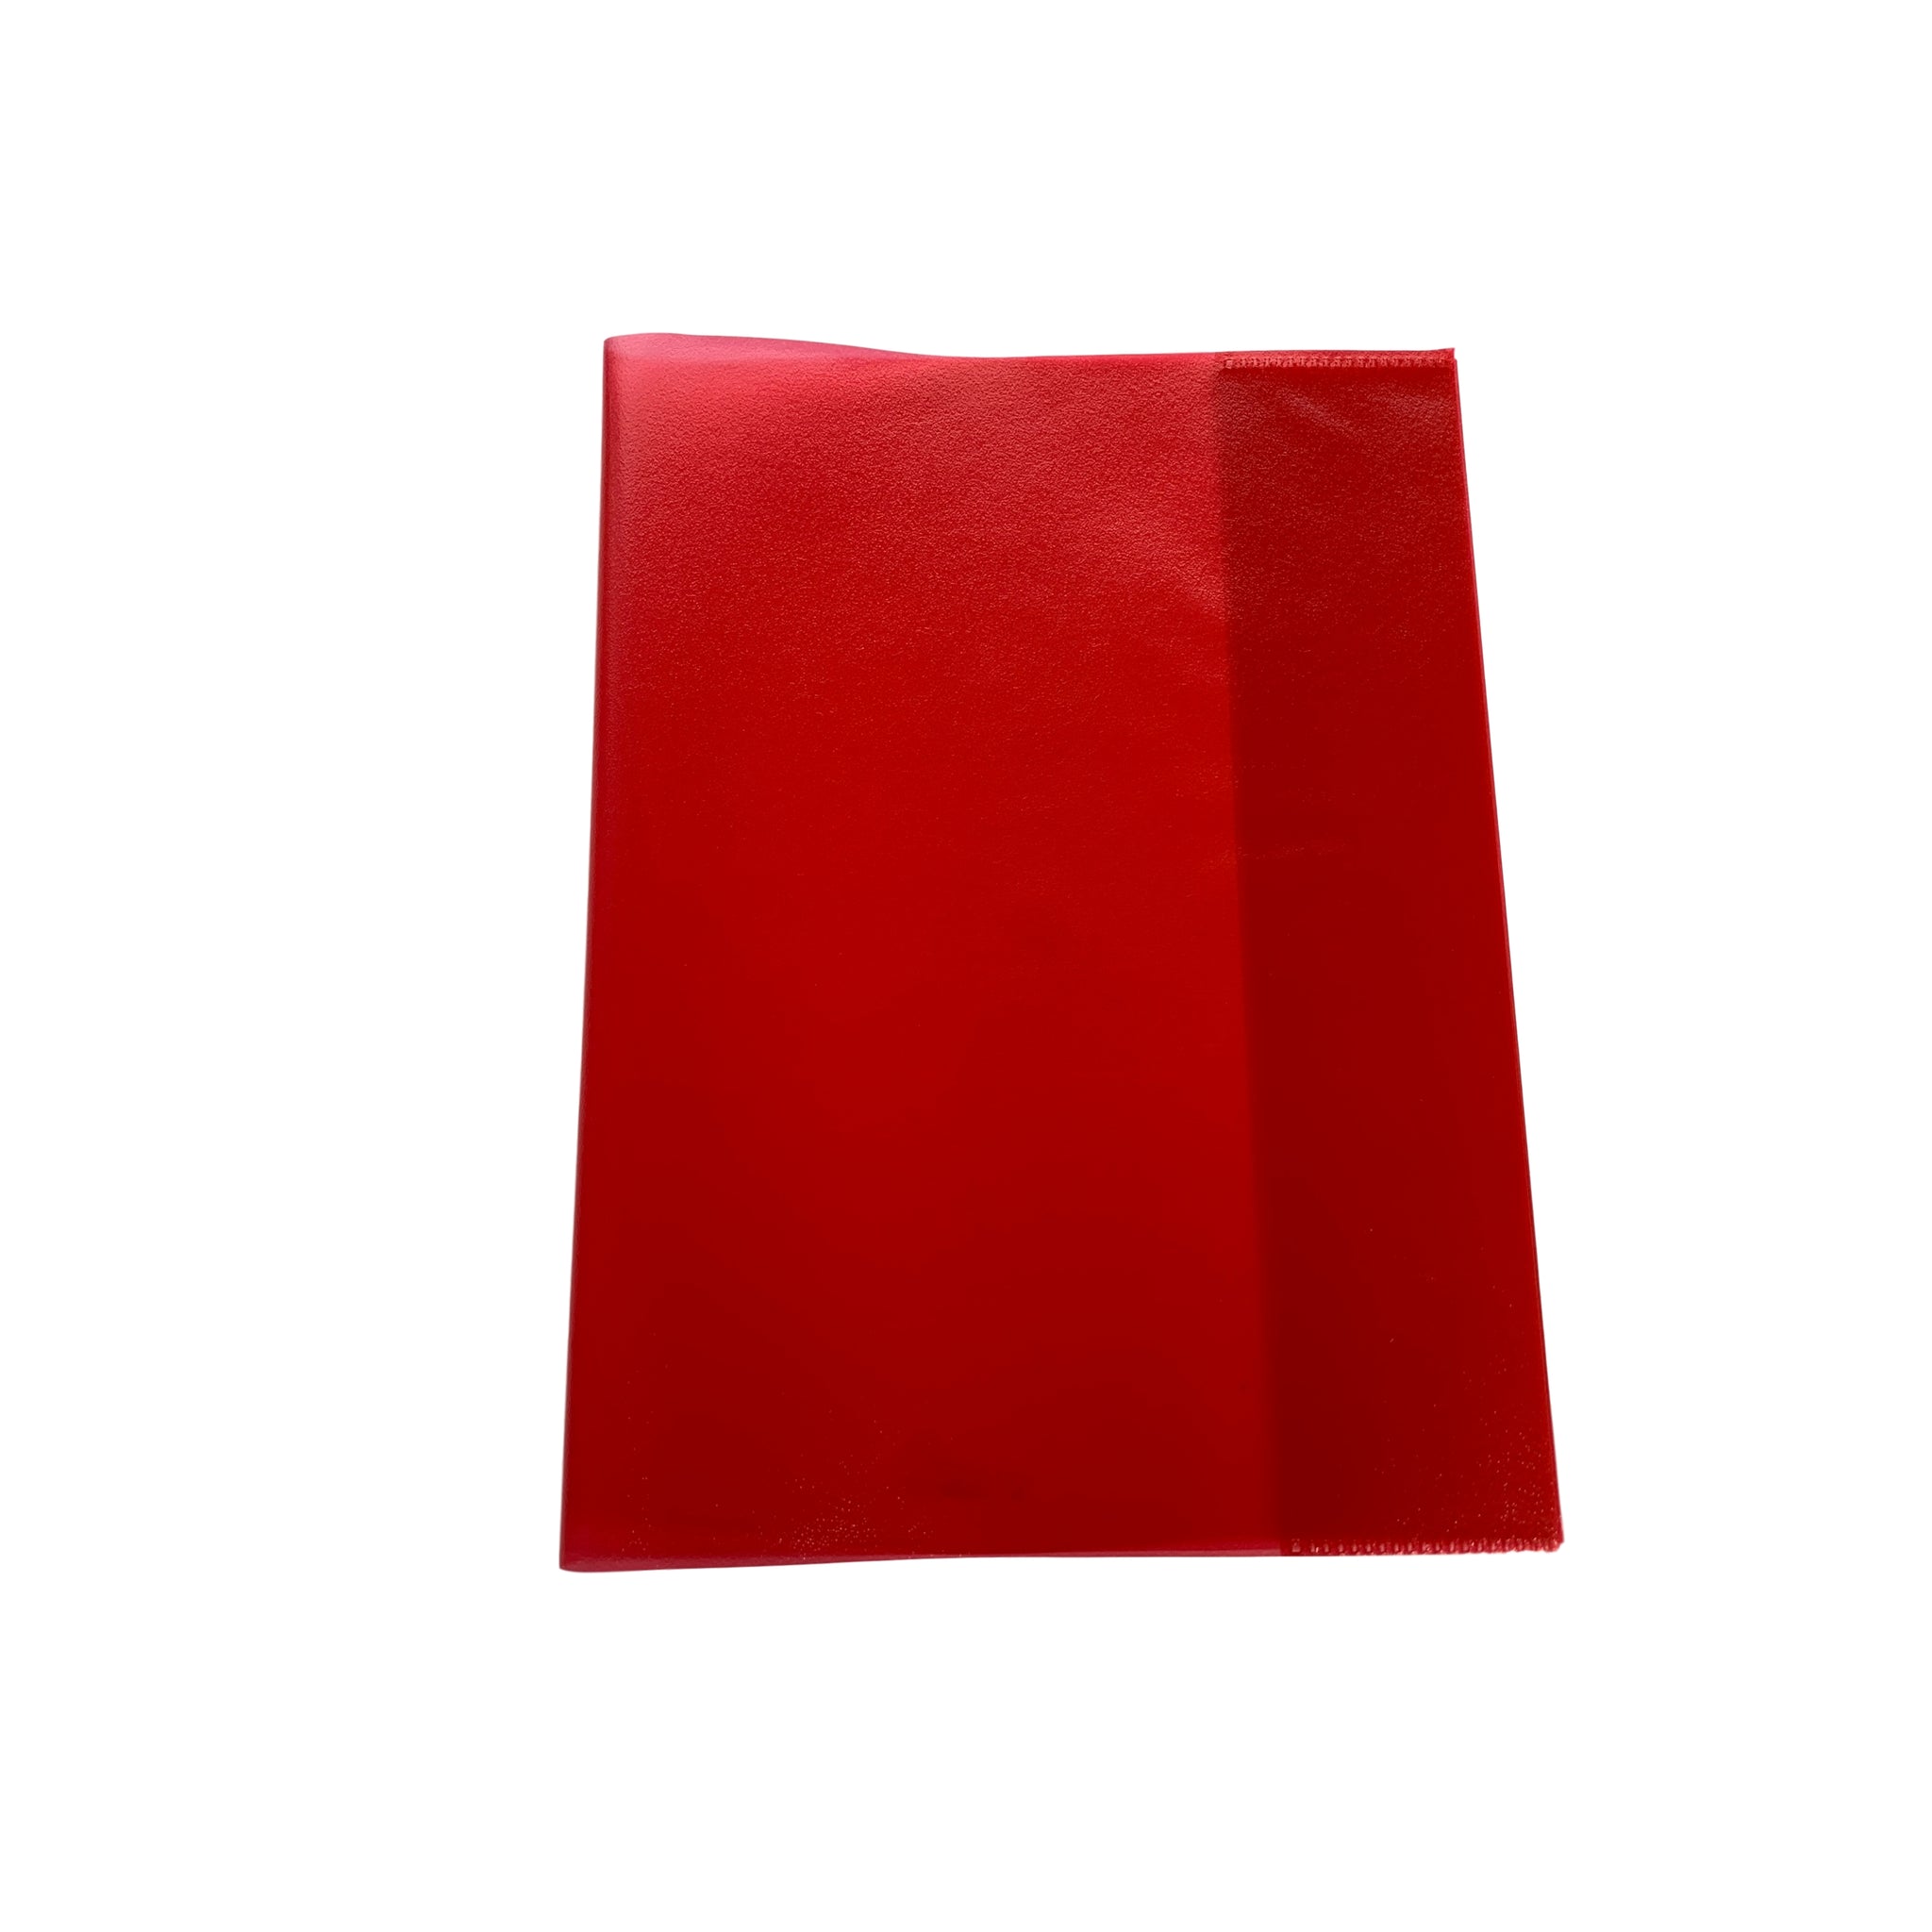 Pack of 10 9x7" Frosted Red Exercise Book Covers